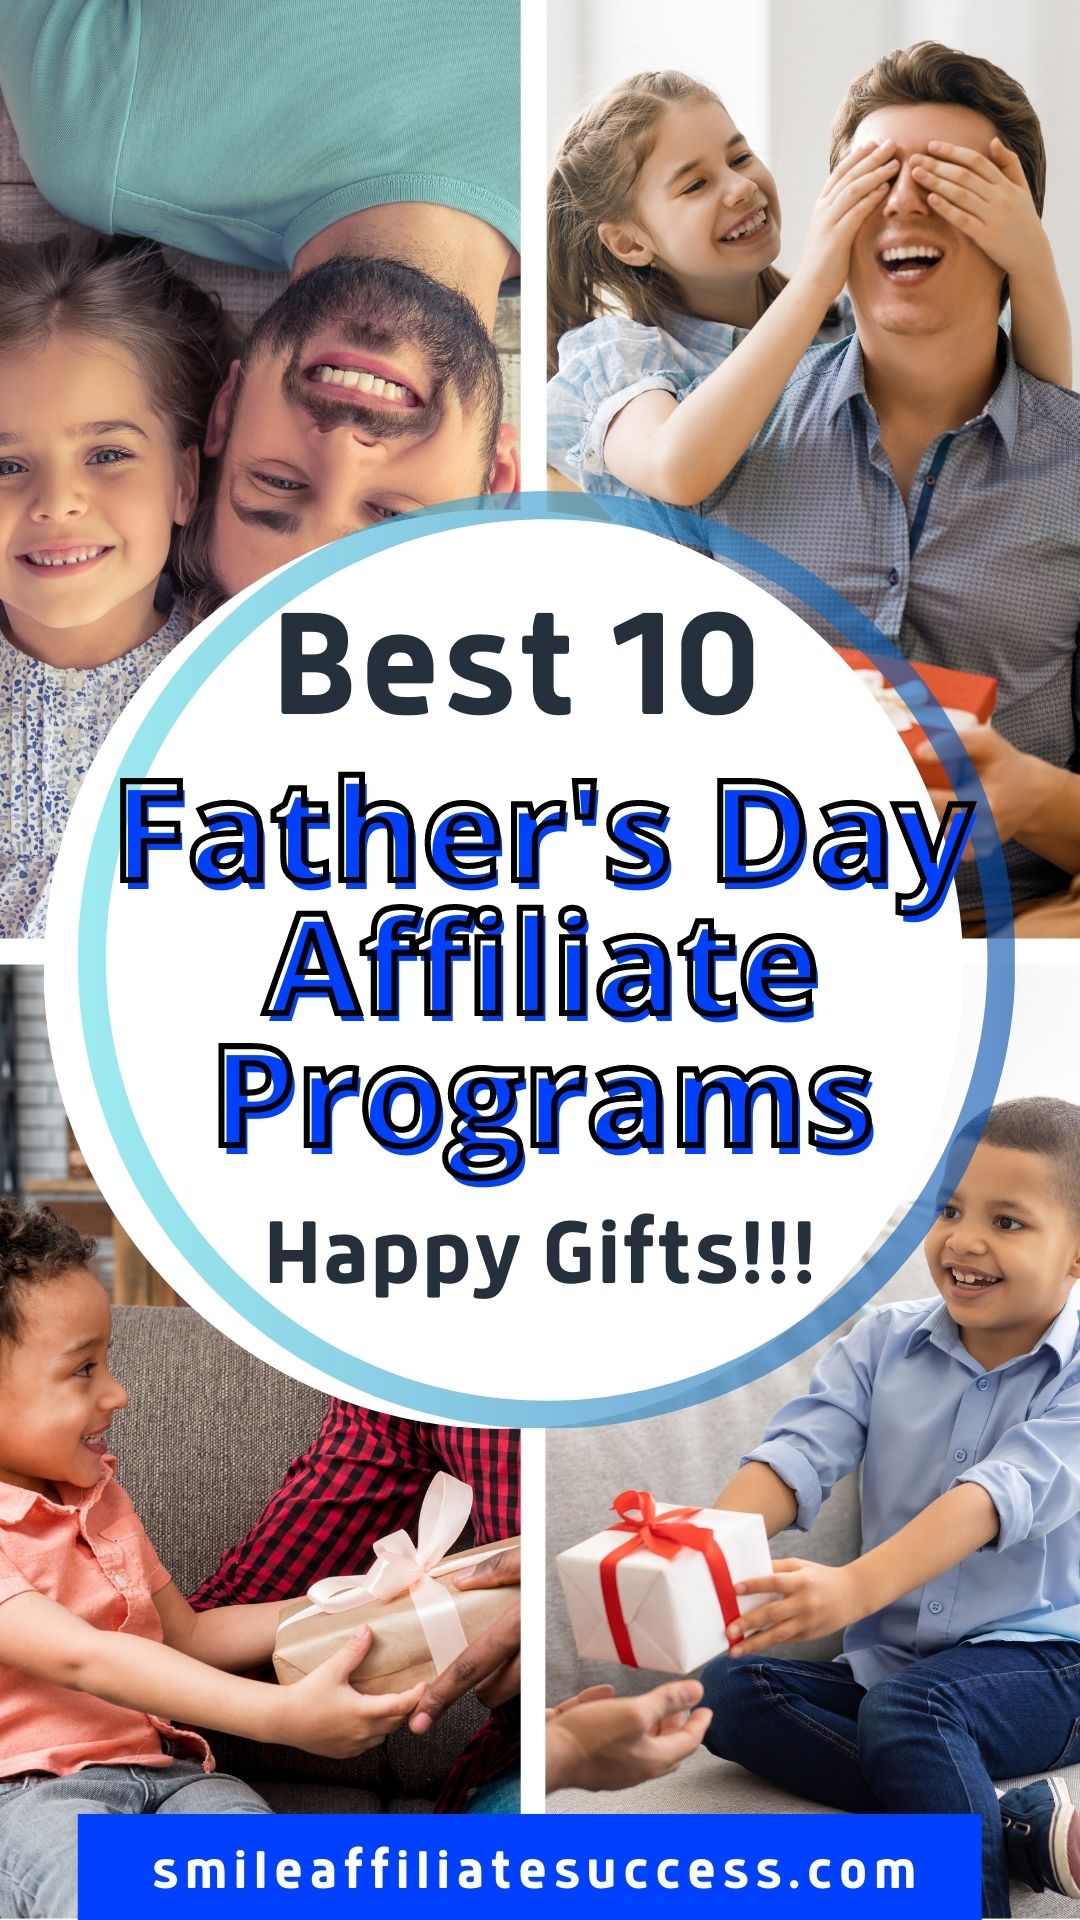 Best 10 Father’s Day Affiliate Programs